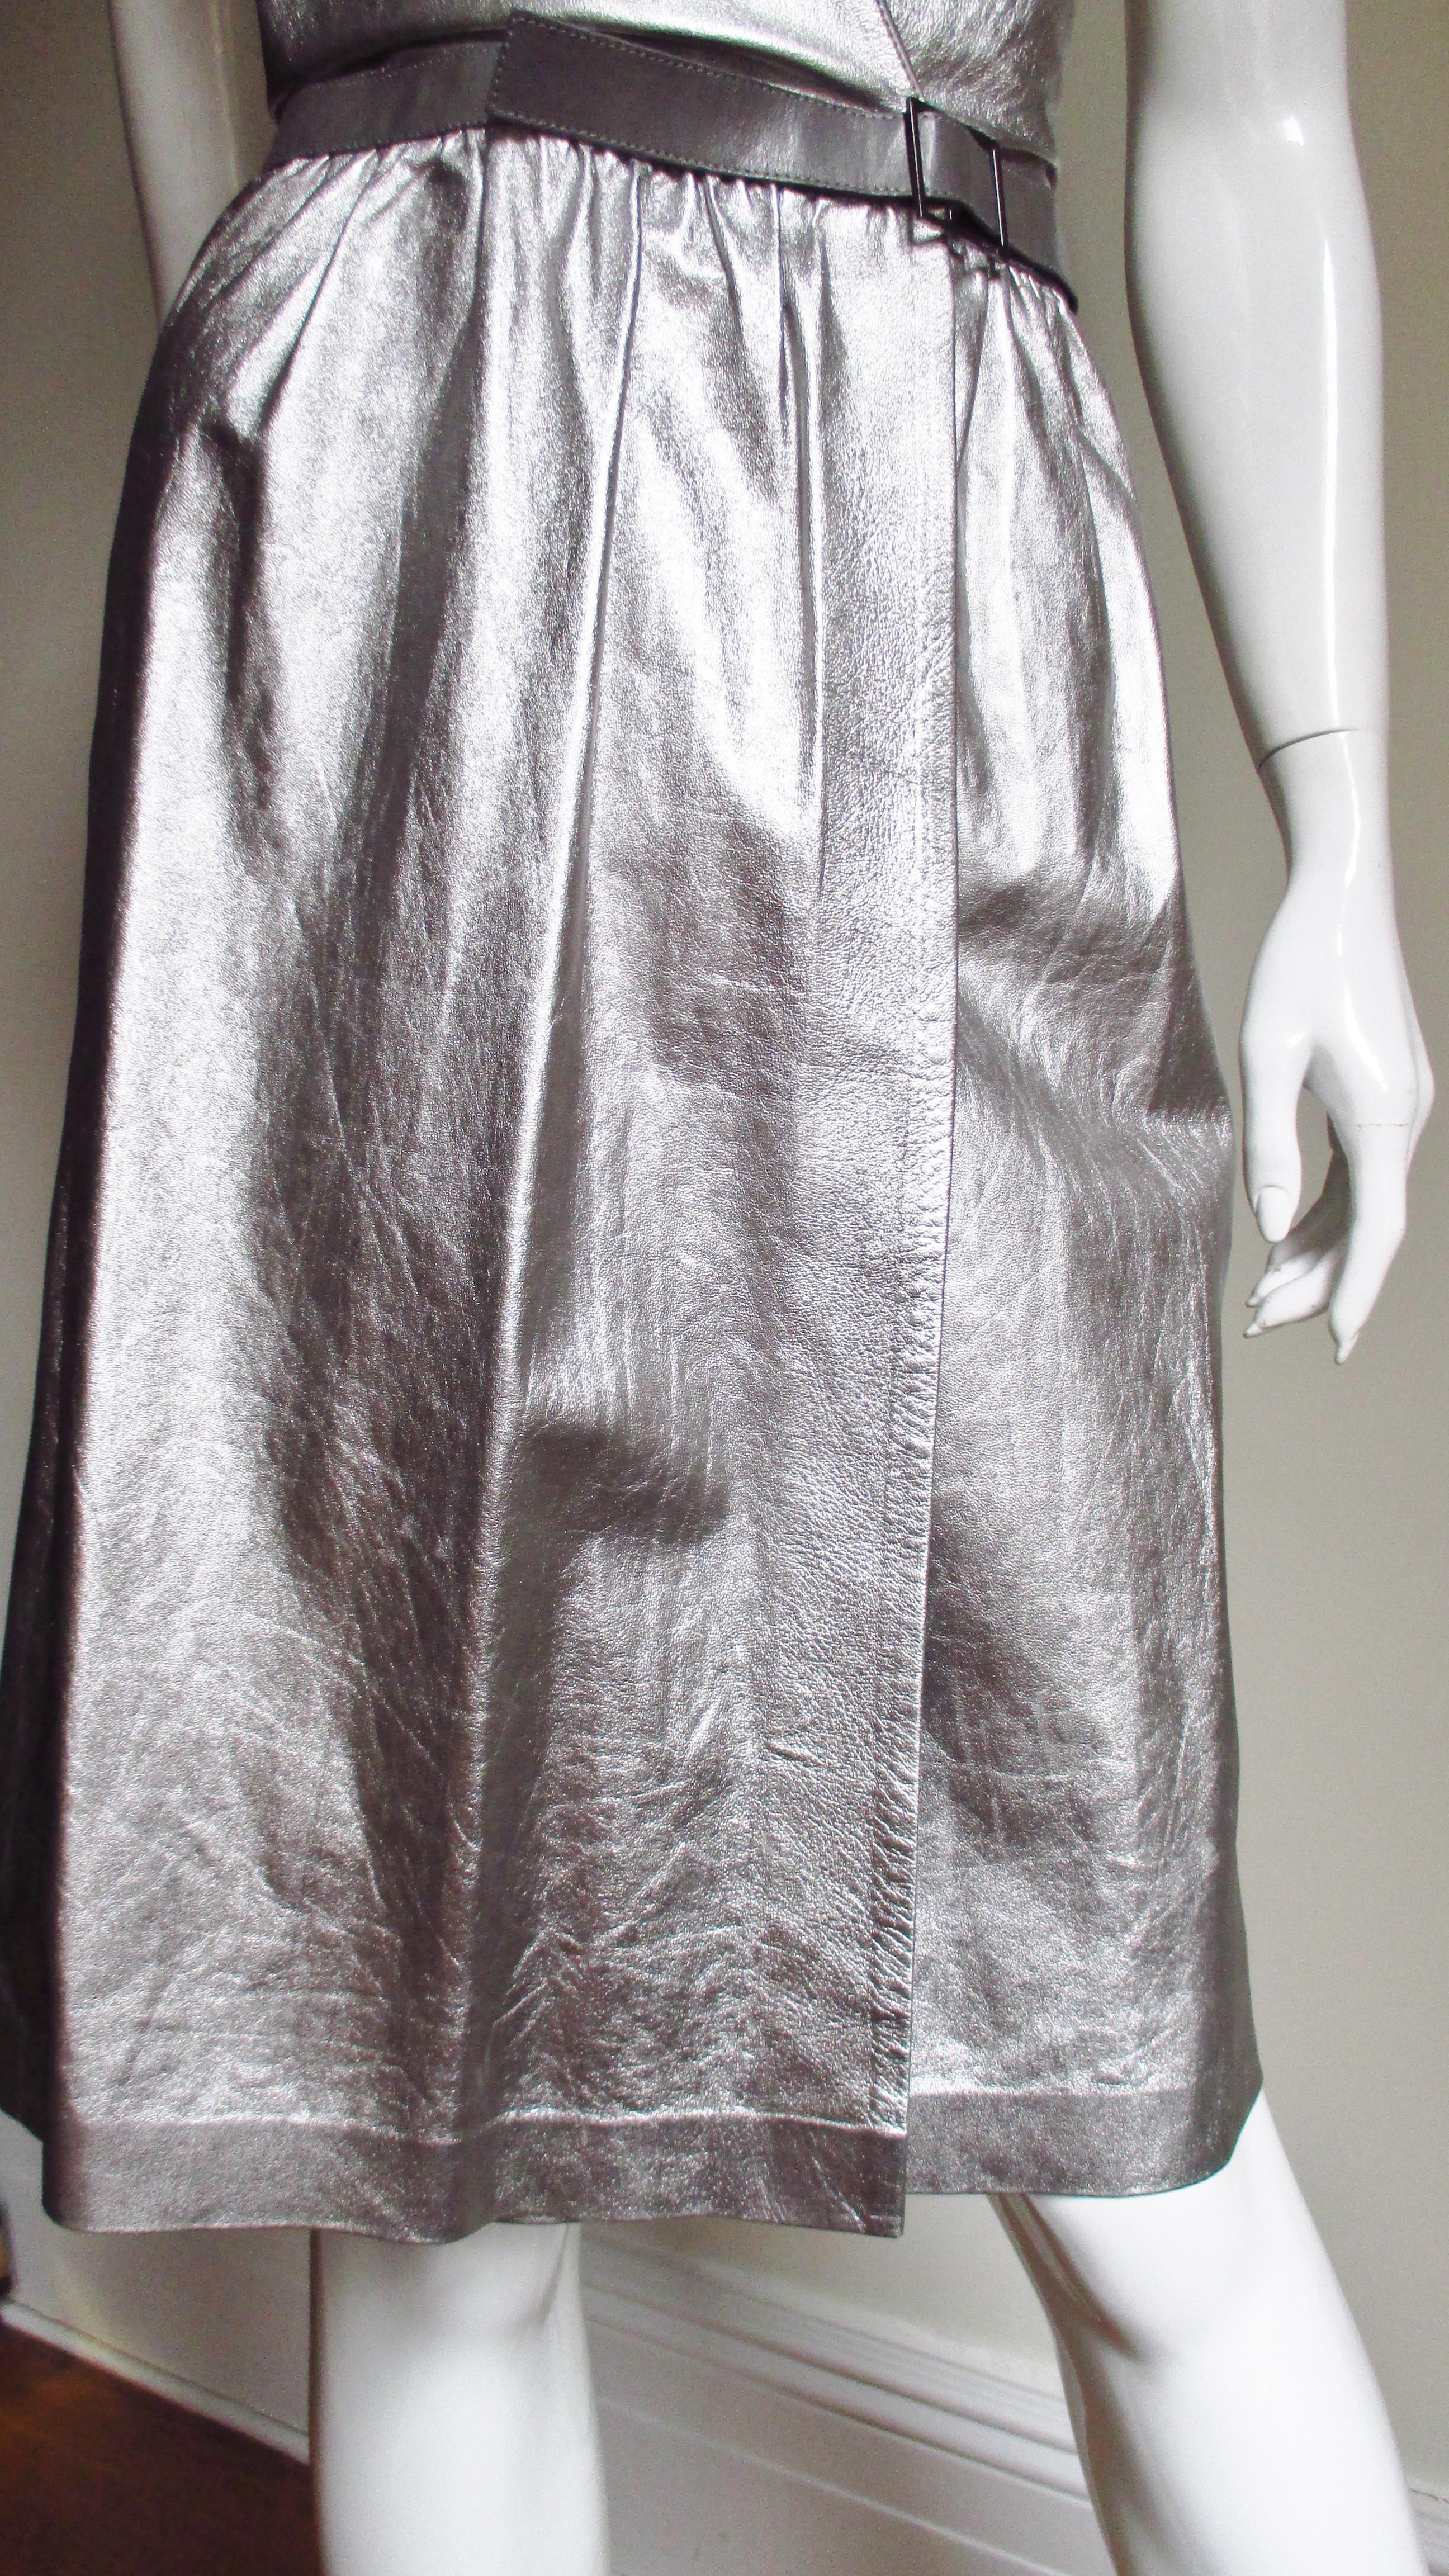 Tom Ford for Gucci Silver Leather Backless Dress In Good Condition For Sale In Water Mill, NY